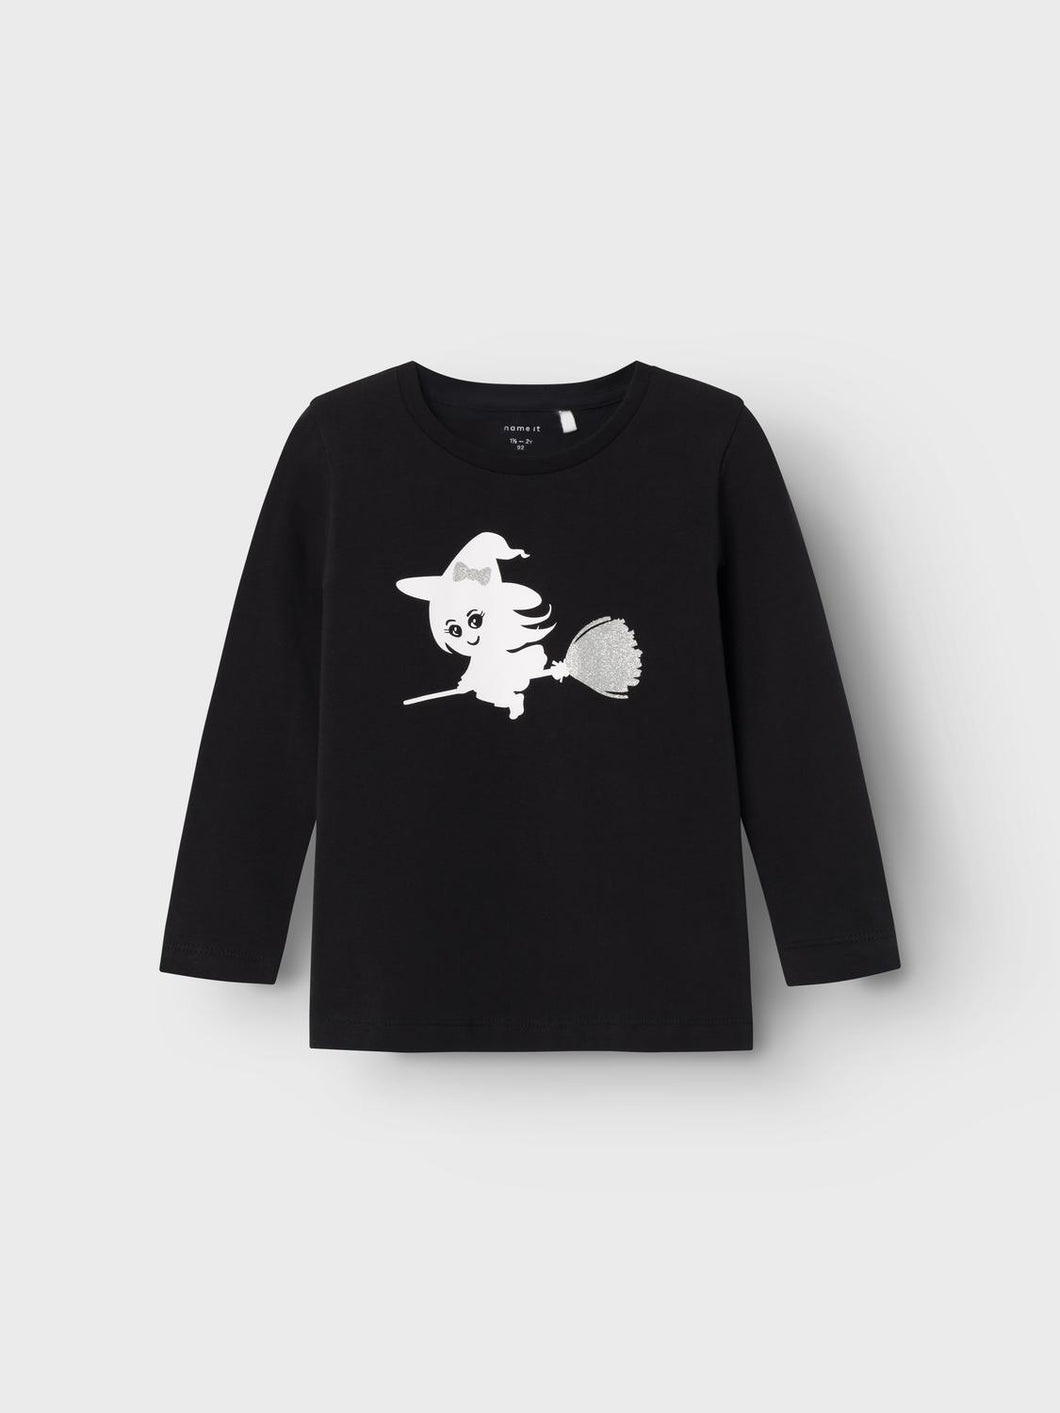 NMFOWITCH T-Shirts & Tops - Black